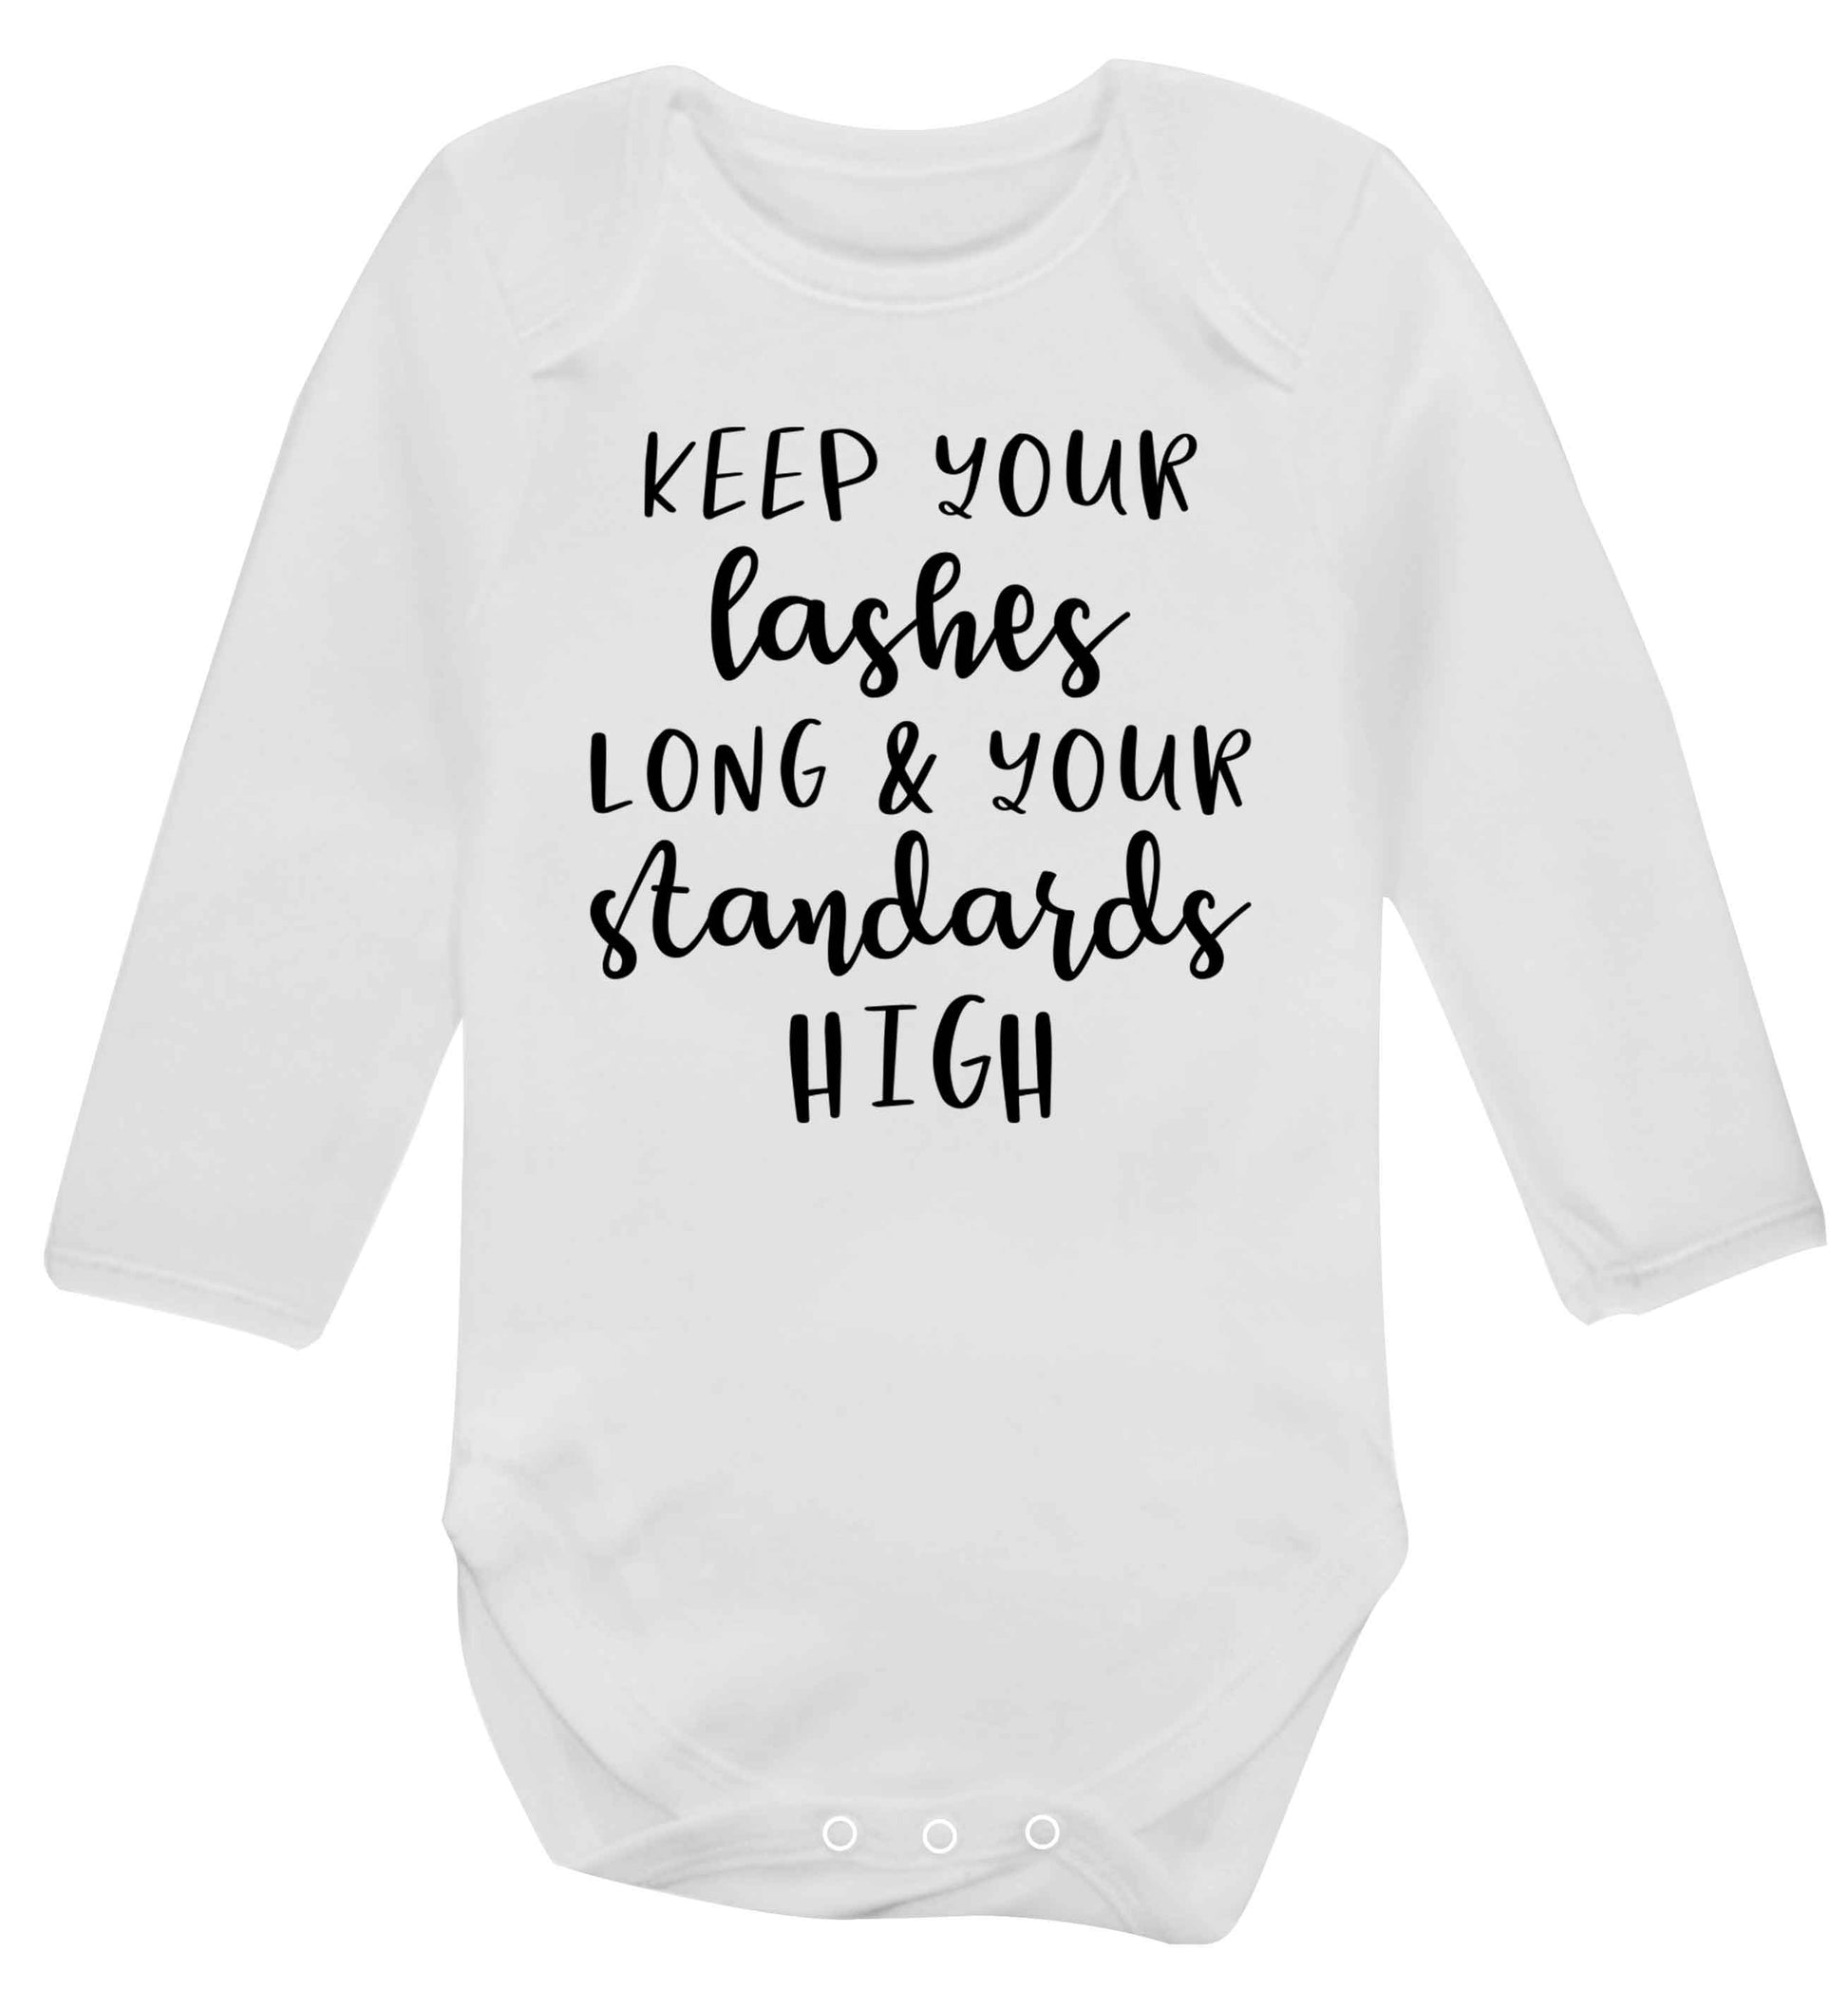 Keep your lashes long and your standards high Baby Vest long sleeved white 6-12 months